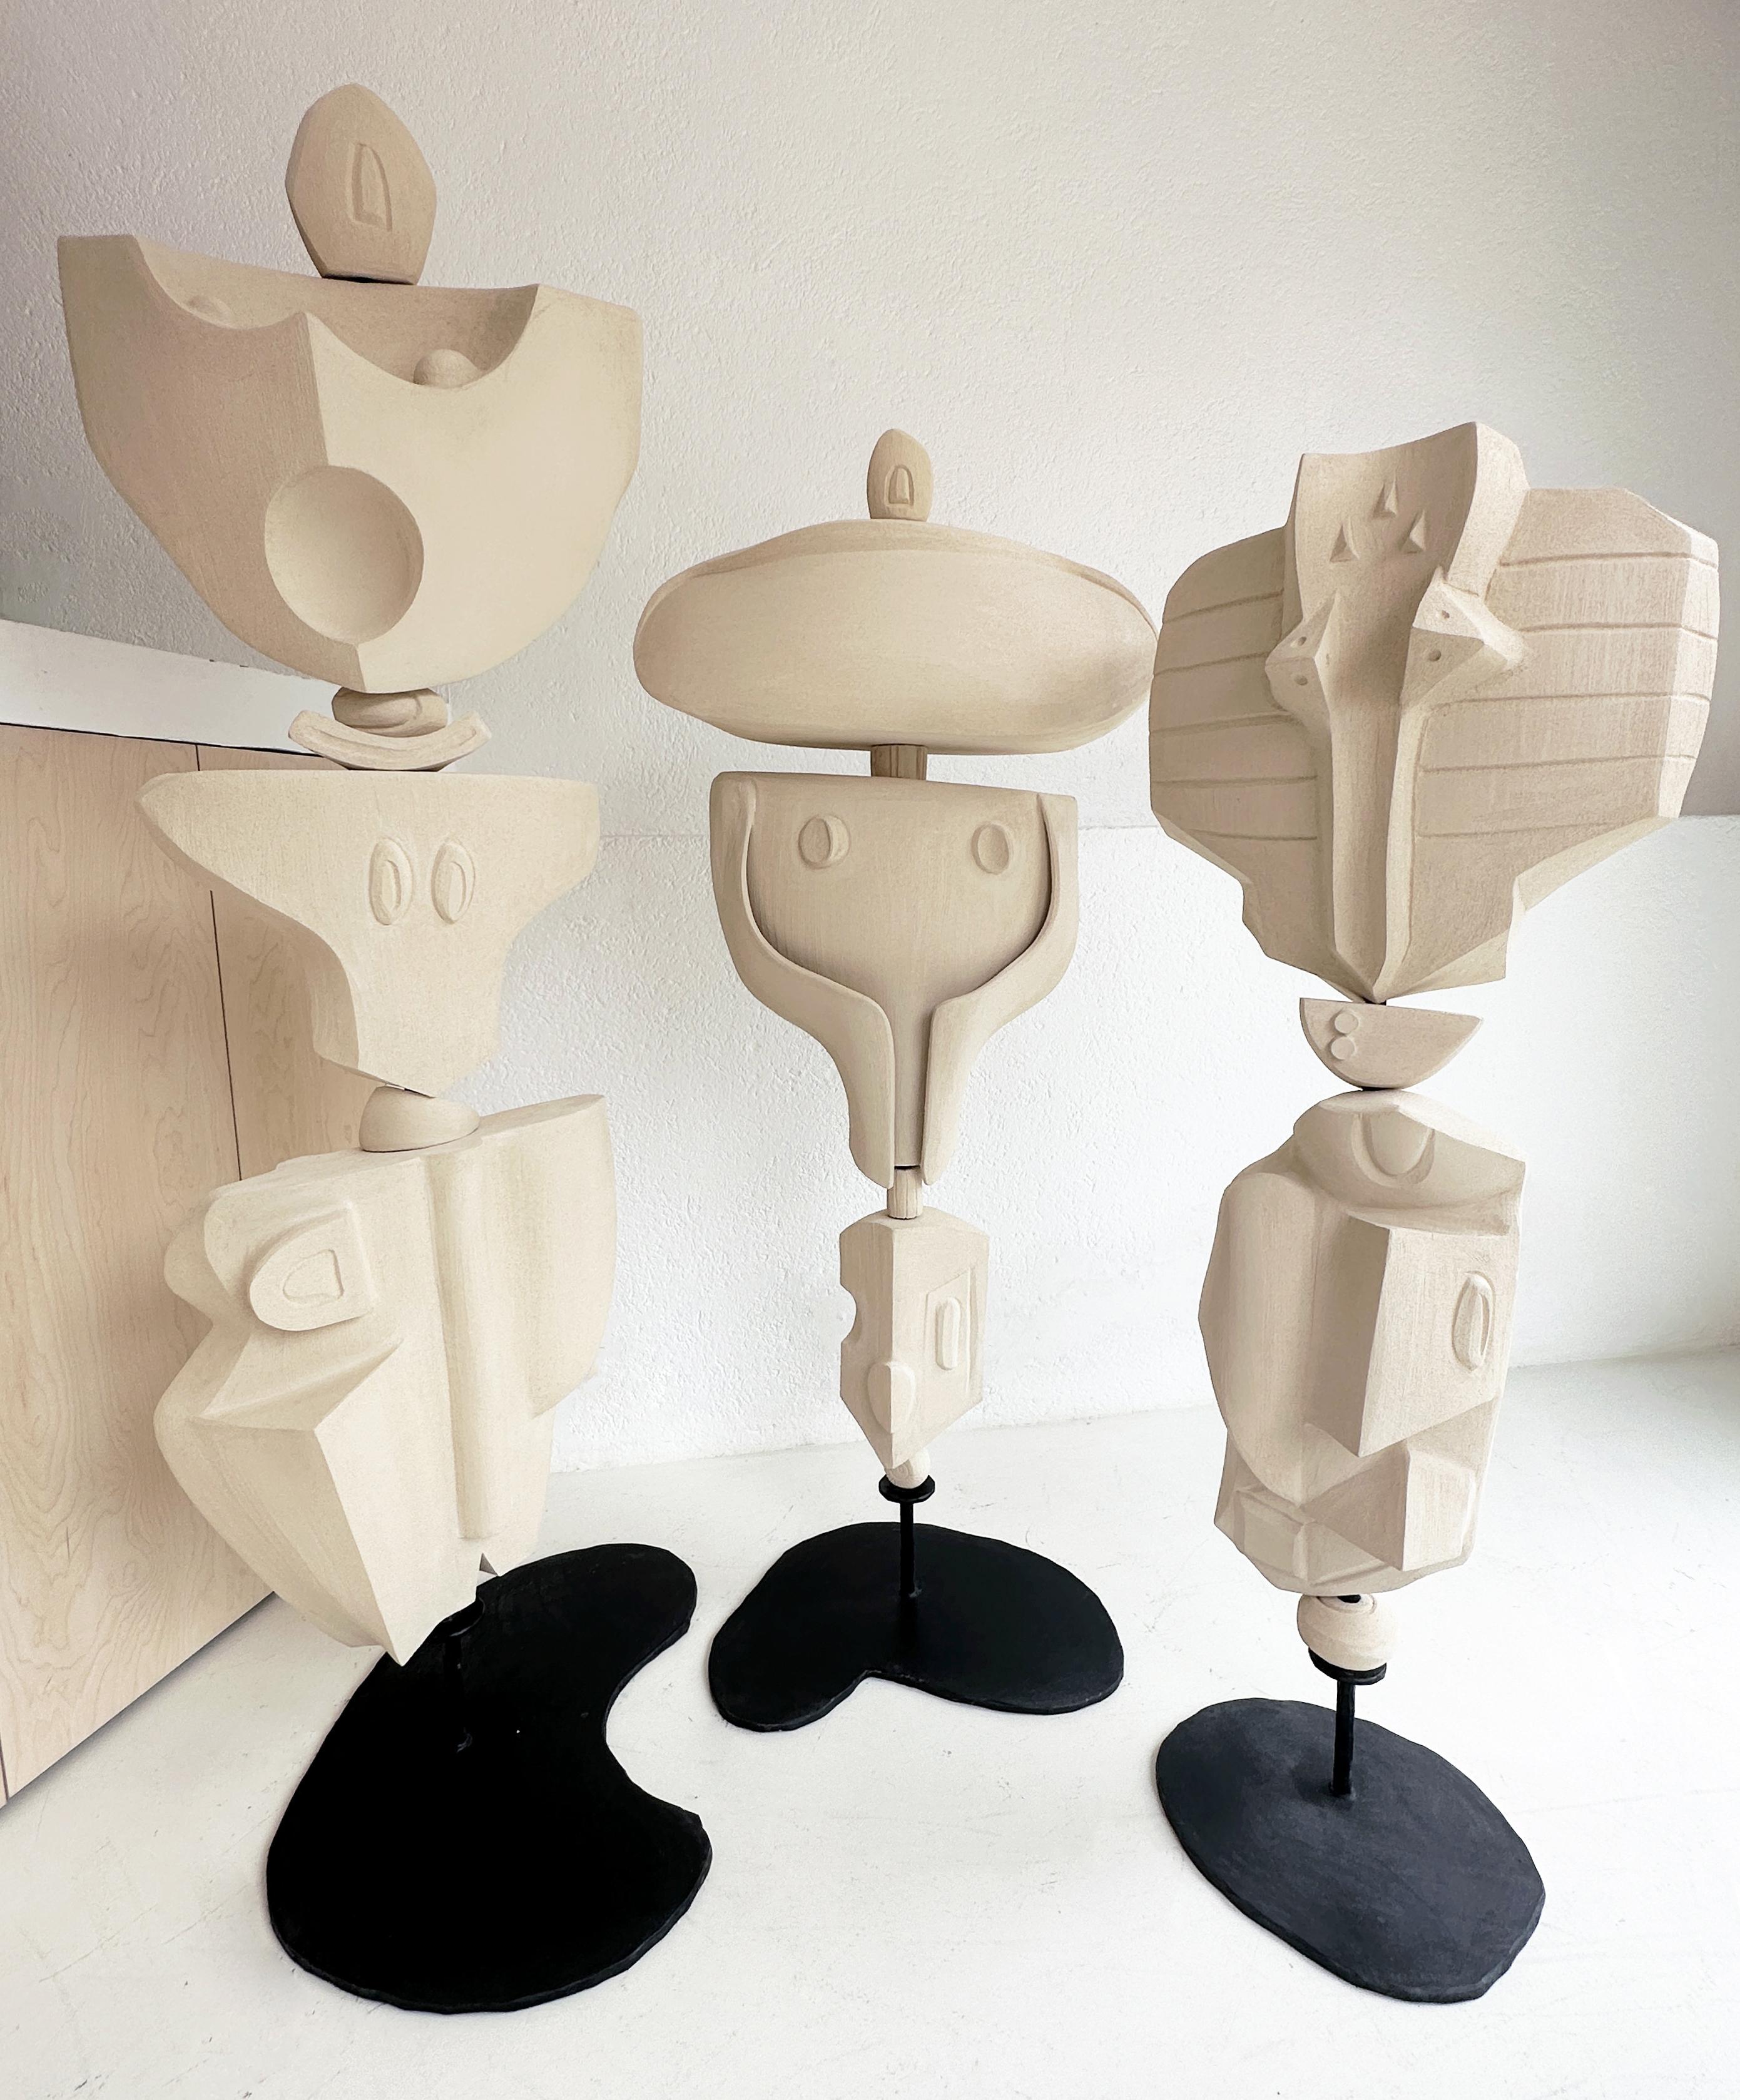 Set of 3 Totem by Olivia Cognet
Dimensions: Small: 170 cm, Medium: 190 cm, Large: 220 cm 
Materials: Ceramic.

Each of Olivia’s handmade creations is a unique work of art, the snapshot of a precious moment captured in a world of fast